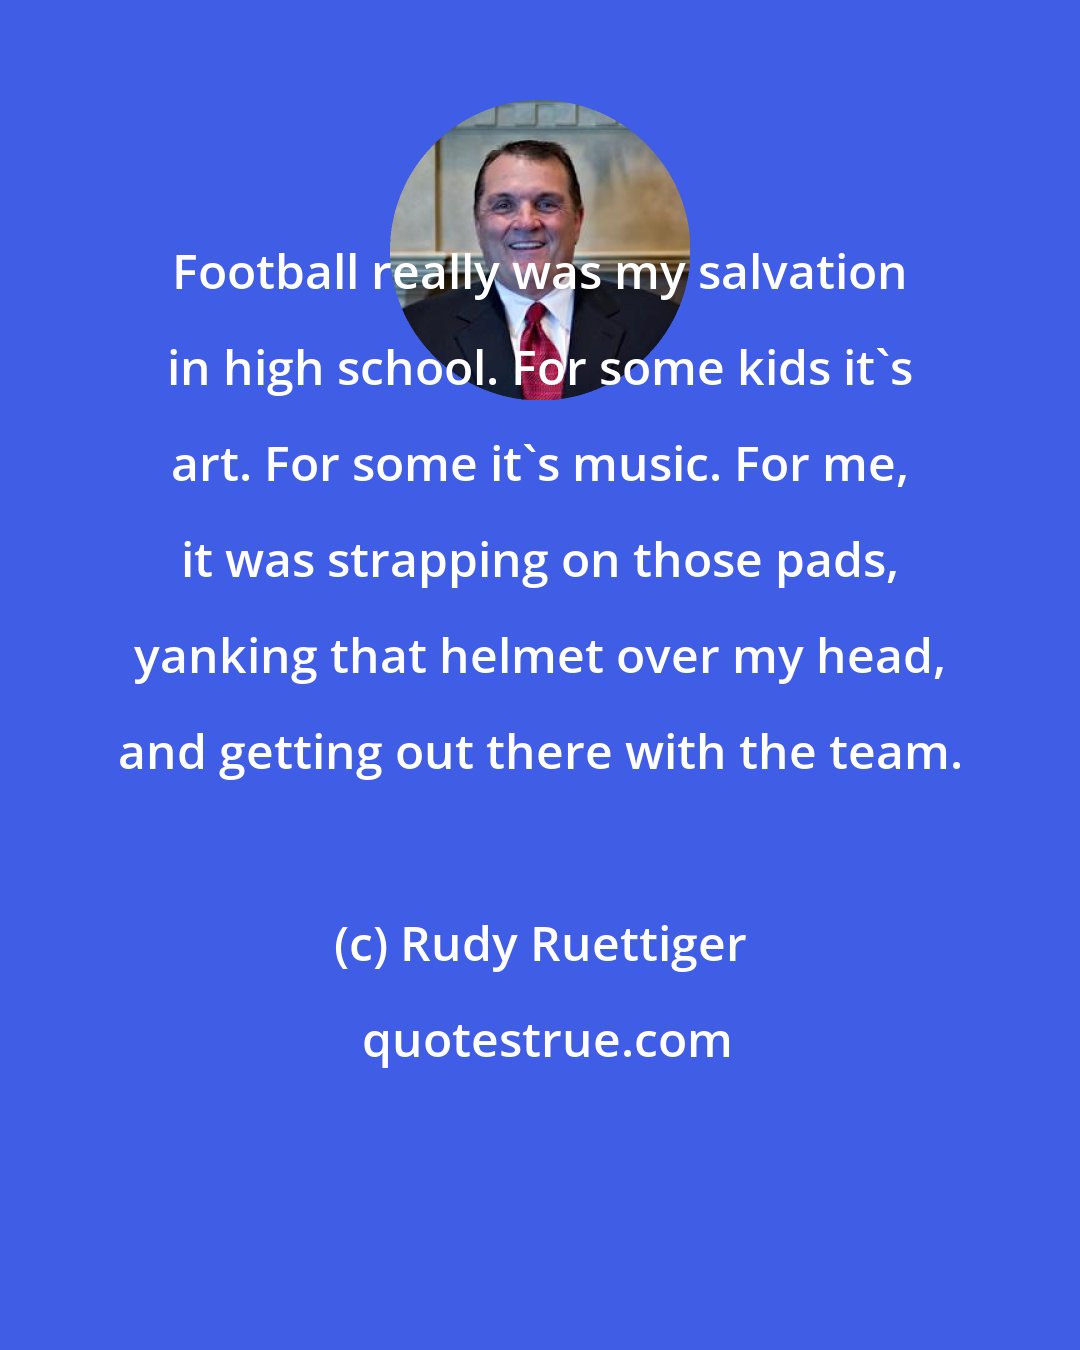 Rudy Ruettiger: Football really was my salvation in high school. For some kids it's art. For some it's music. For me, it was strapping on those pads, yanking that helmet over my head, and getting out there with the team.